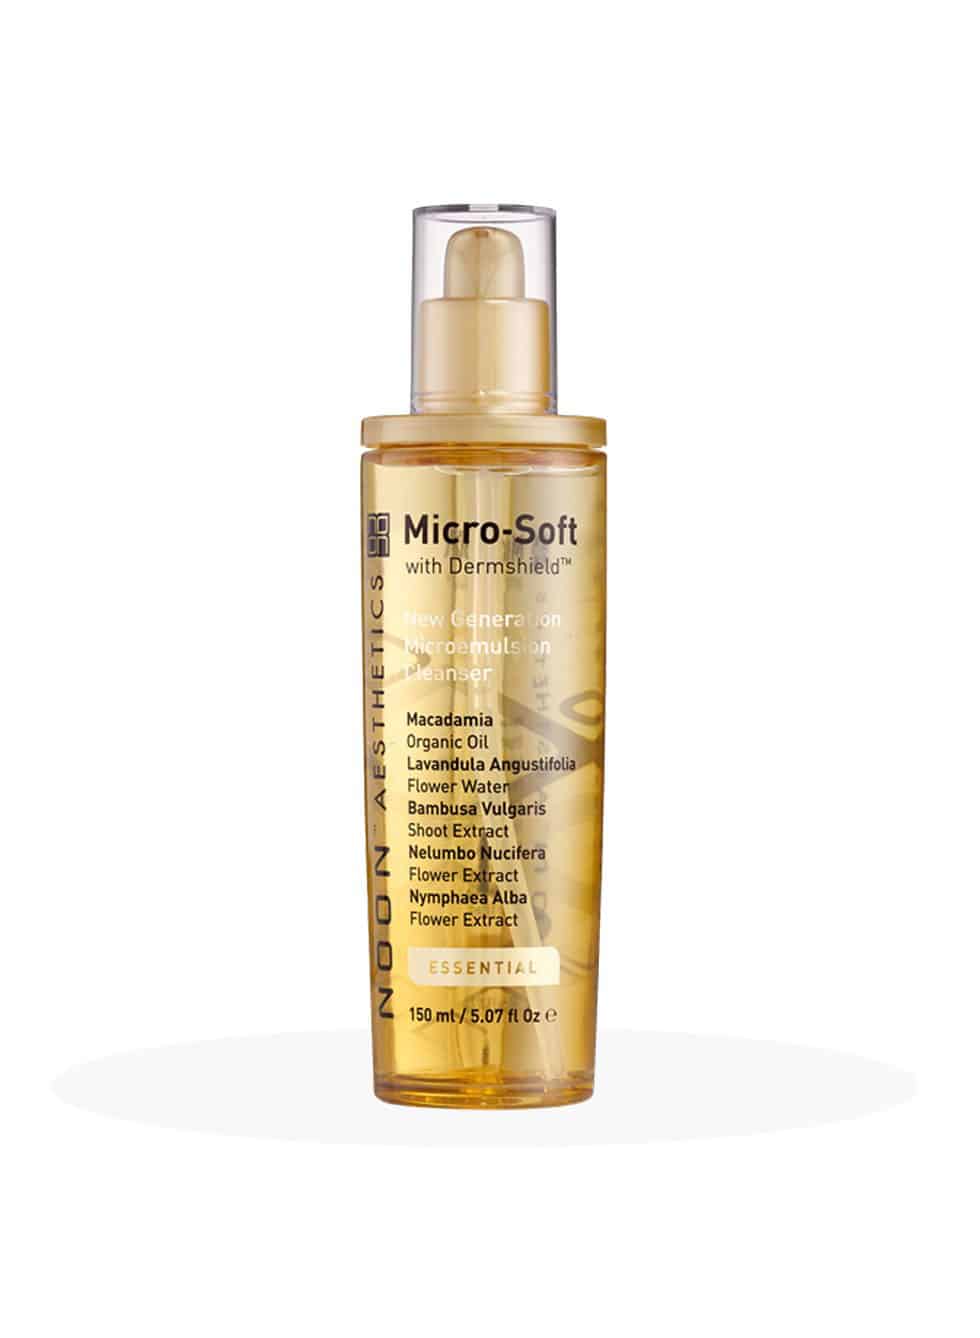 NOON Micro Soft Cleanser